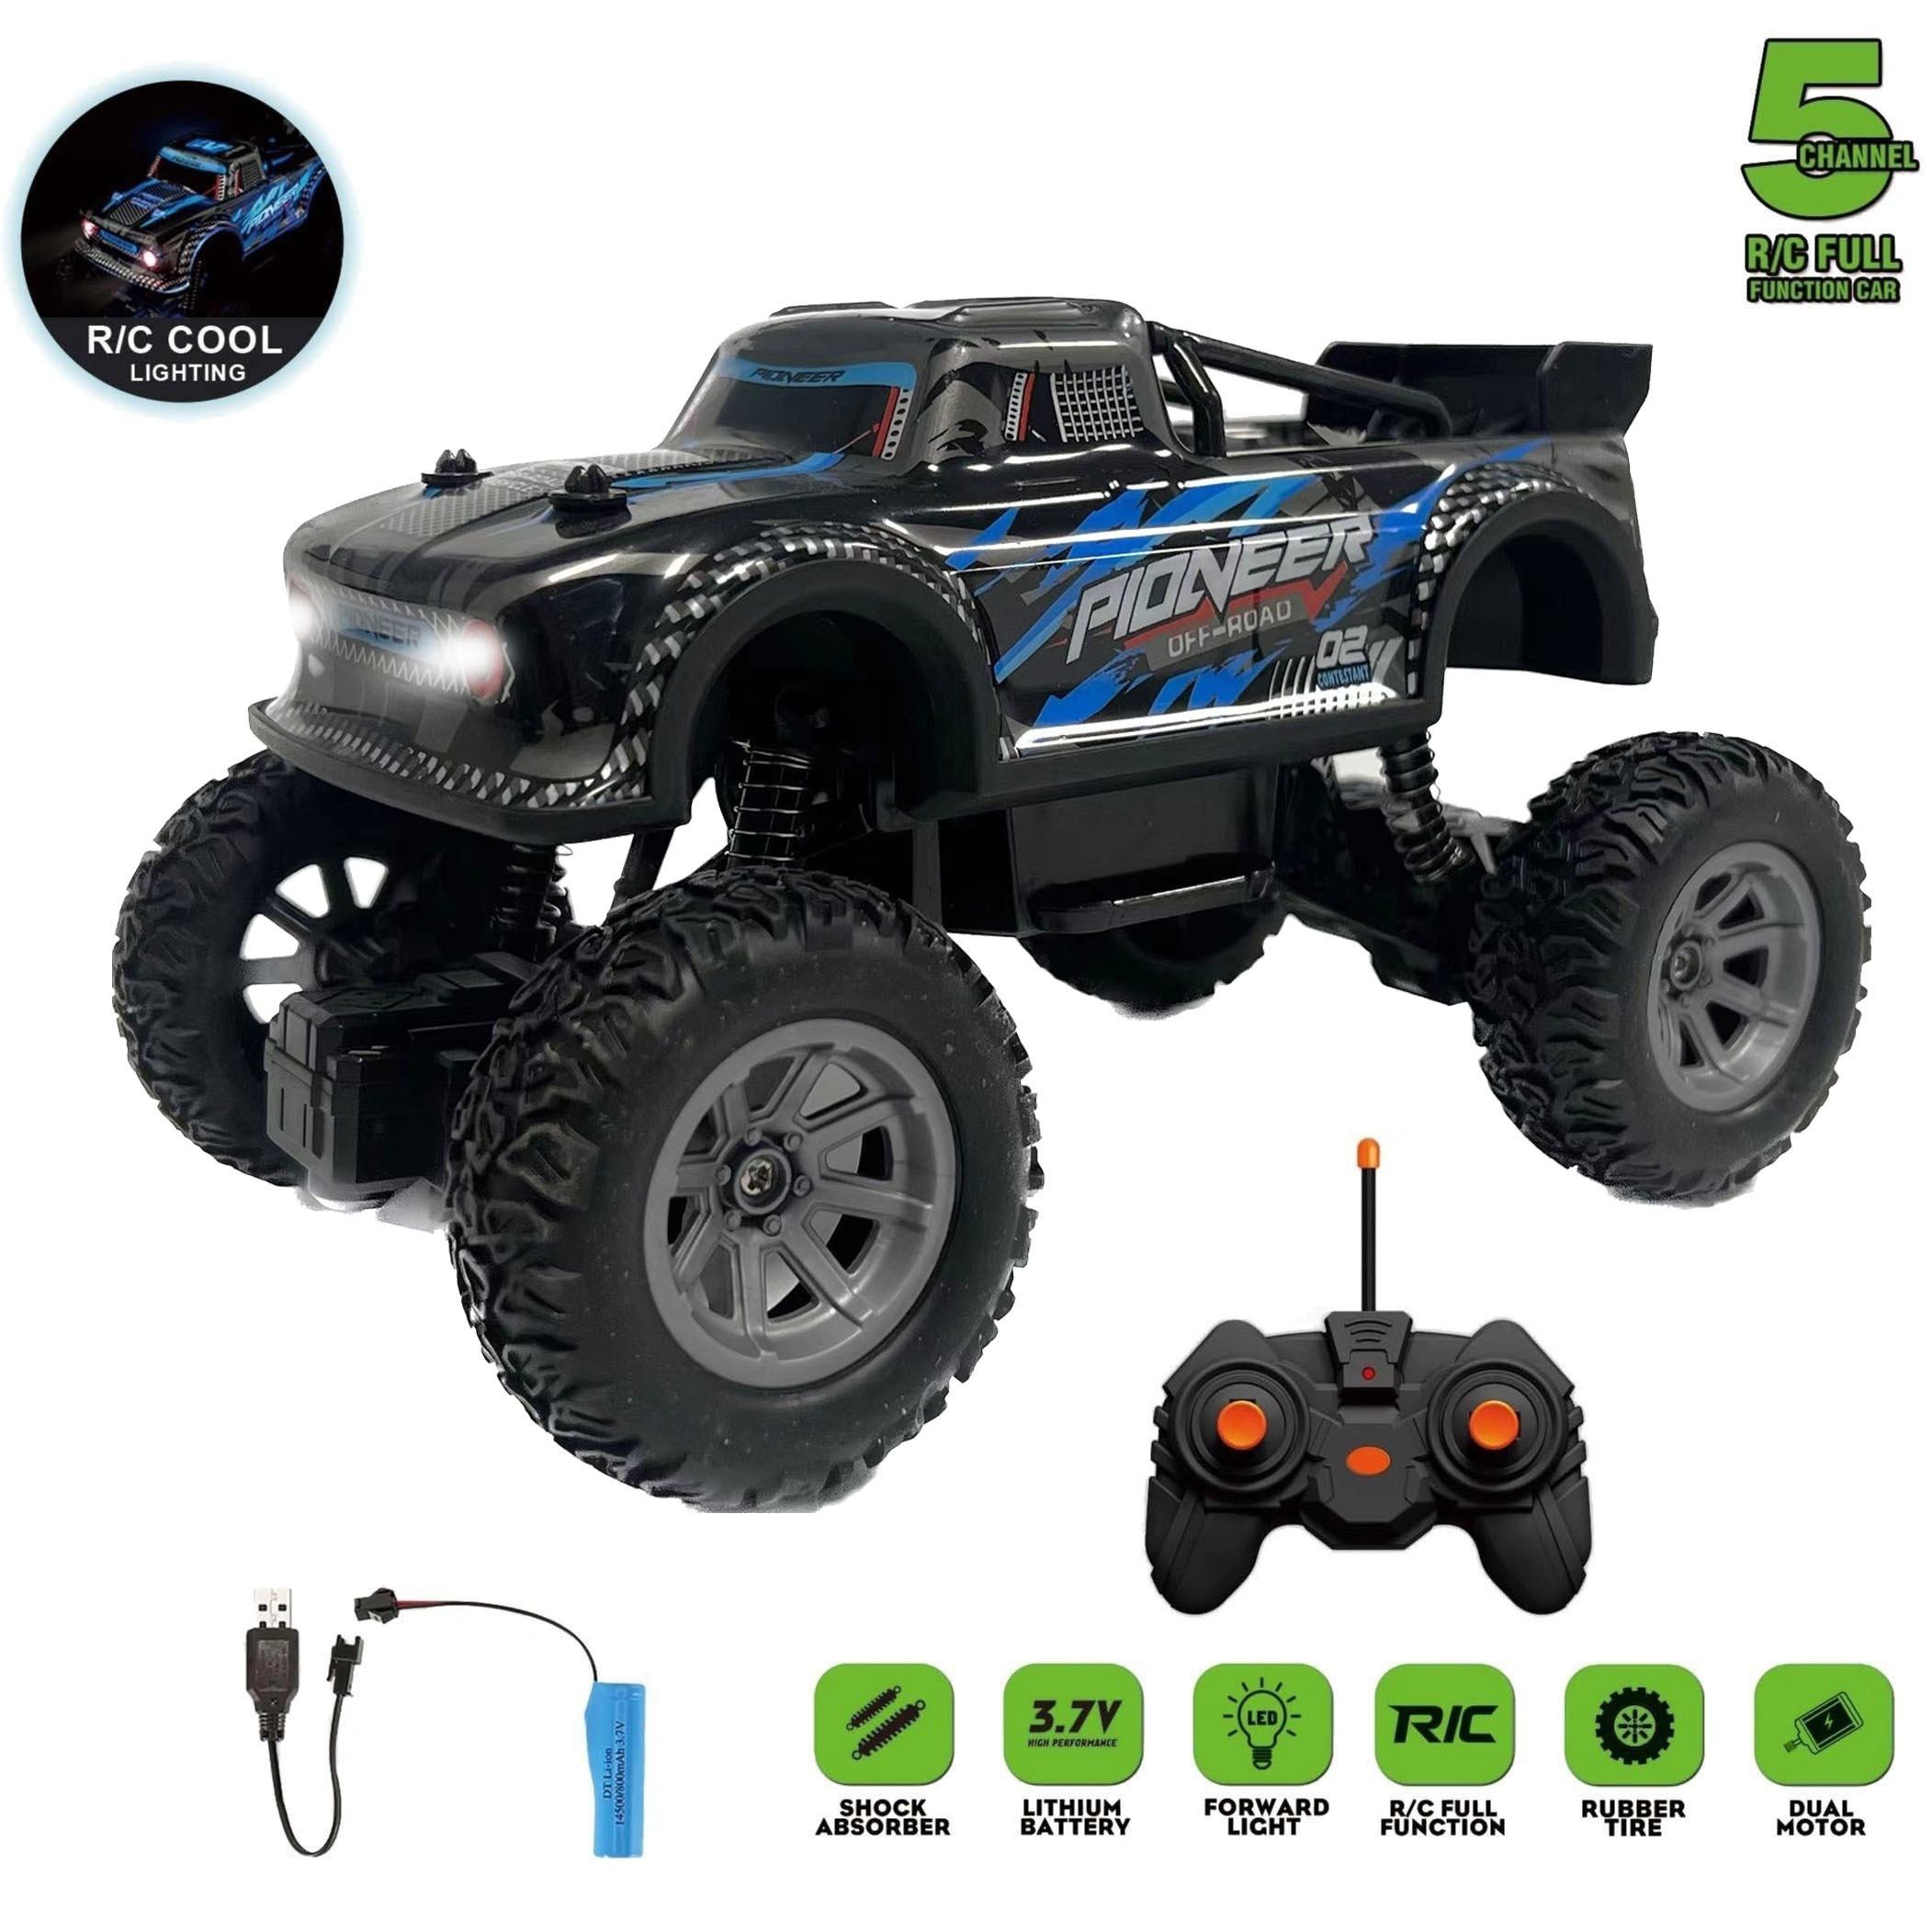 

Remote Control Car, Rc Cars Stunt Car Toy, Rotating Rc Car With Lights, Gift Toy Cars For Boys/girls 3 4 5 Years Old, Competitive Drift High Speed Christmas Halloween Thanksgiving Gift Carnival